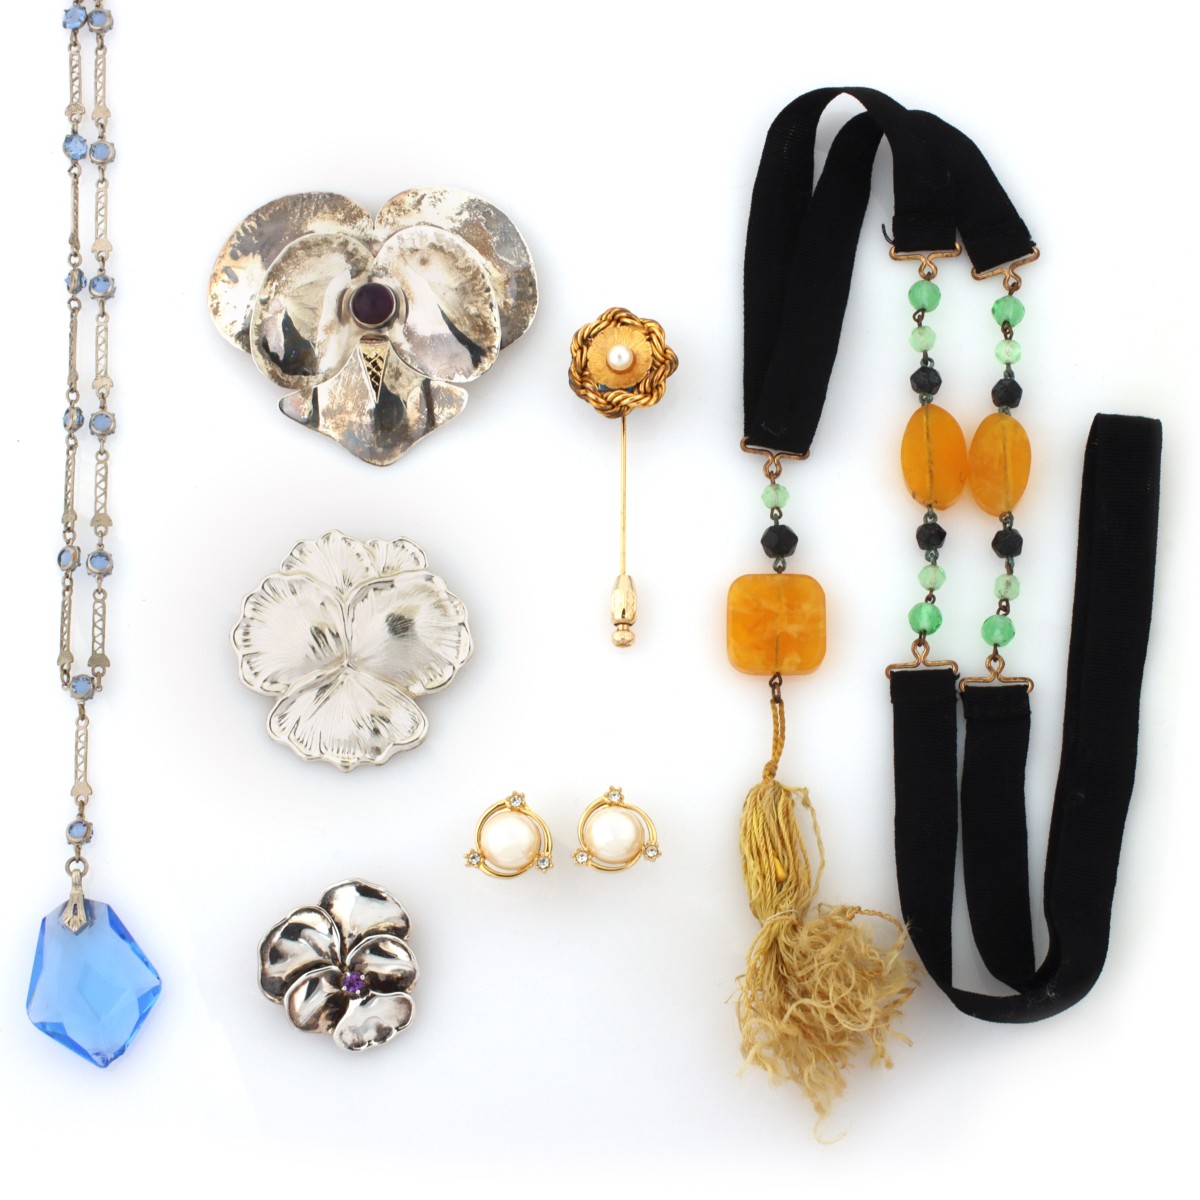 A COLLECTION OF ANTIQUE AND ESTATE JEWELRY